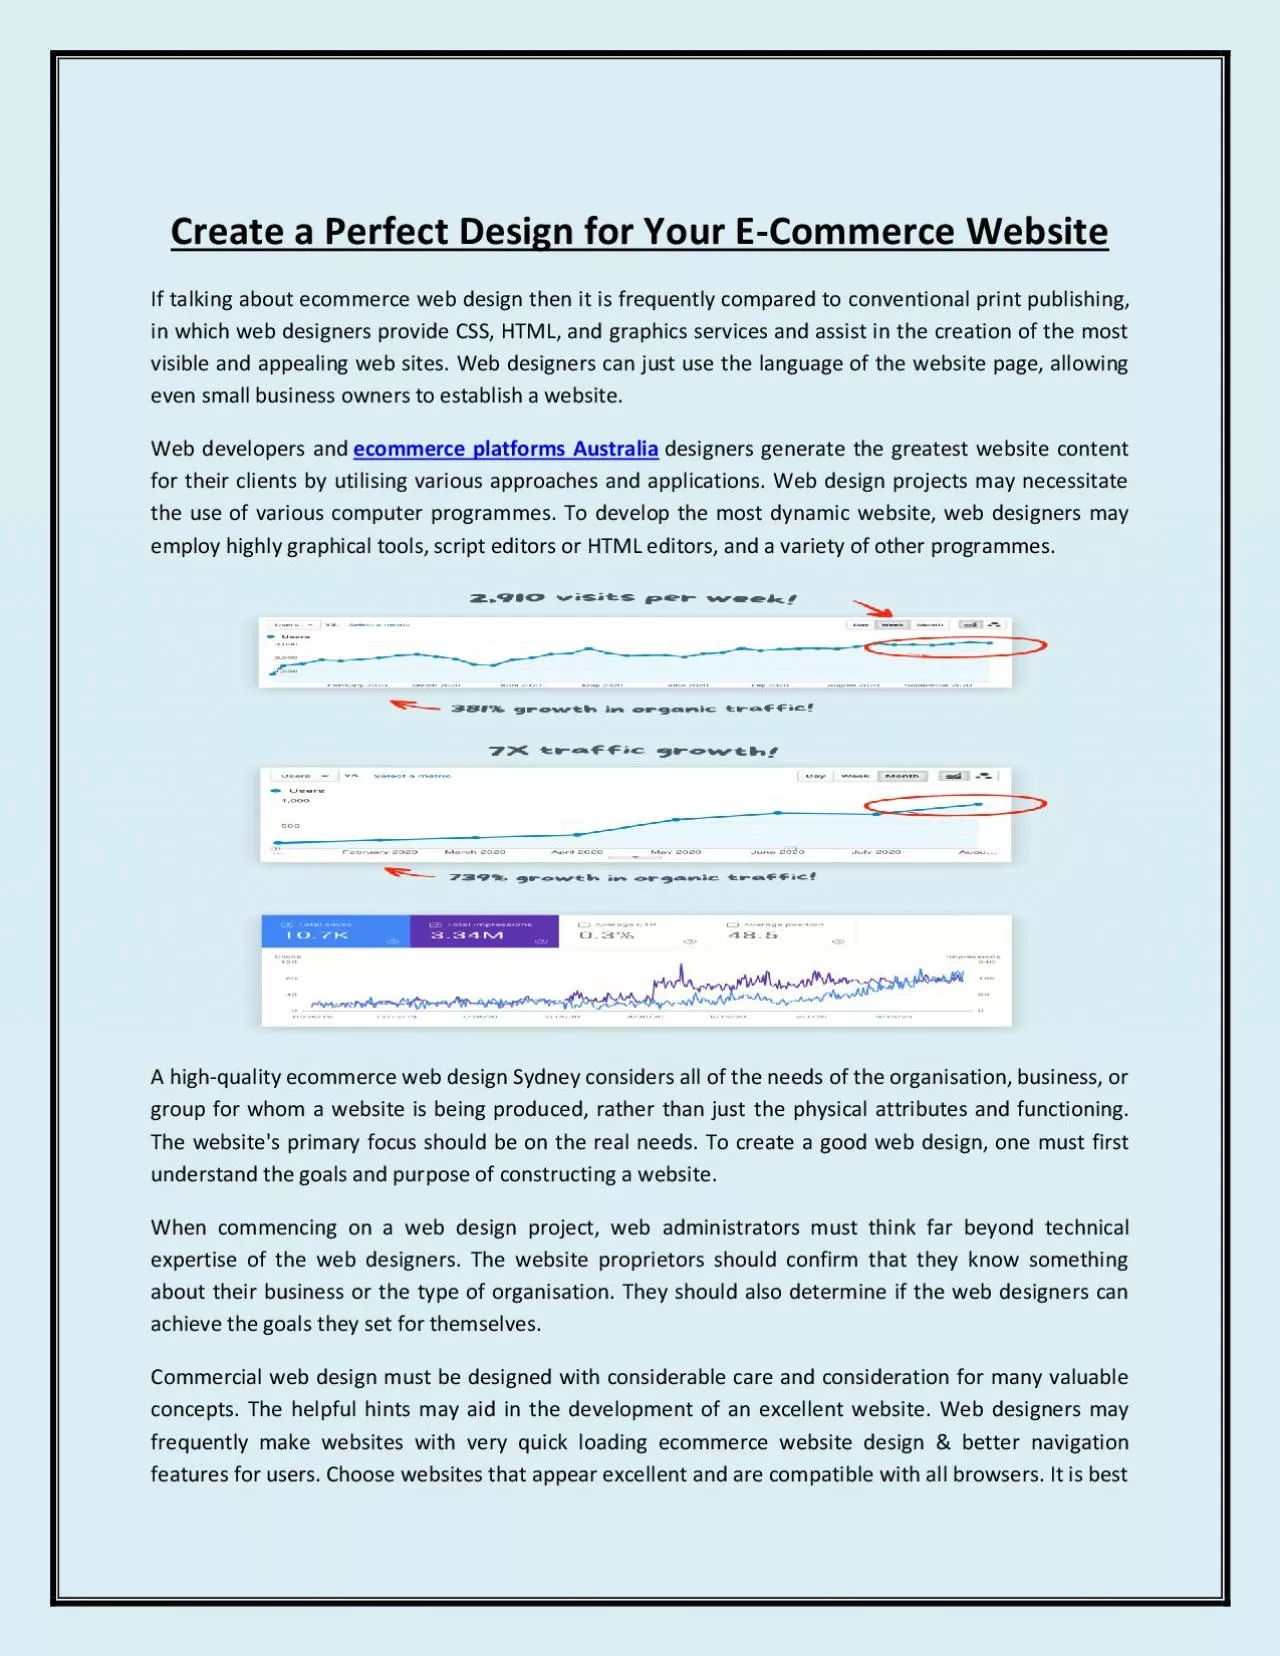 Create a Perfect Design for Your E-Commerce Website